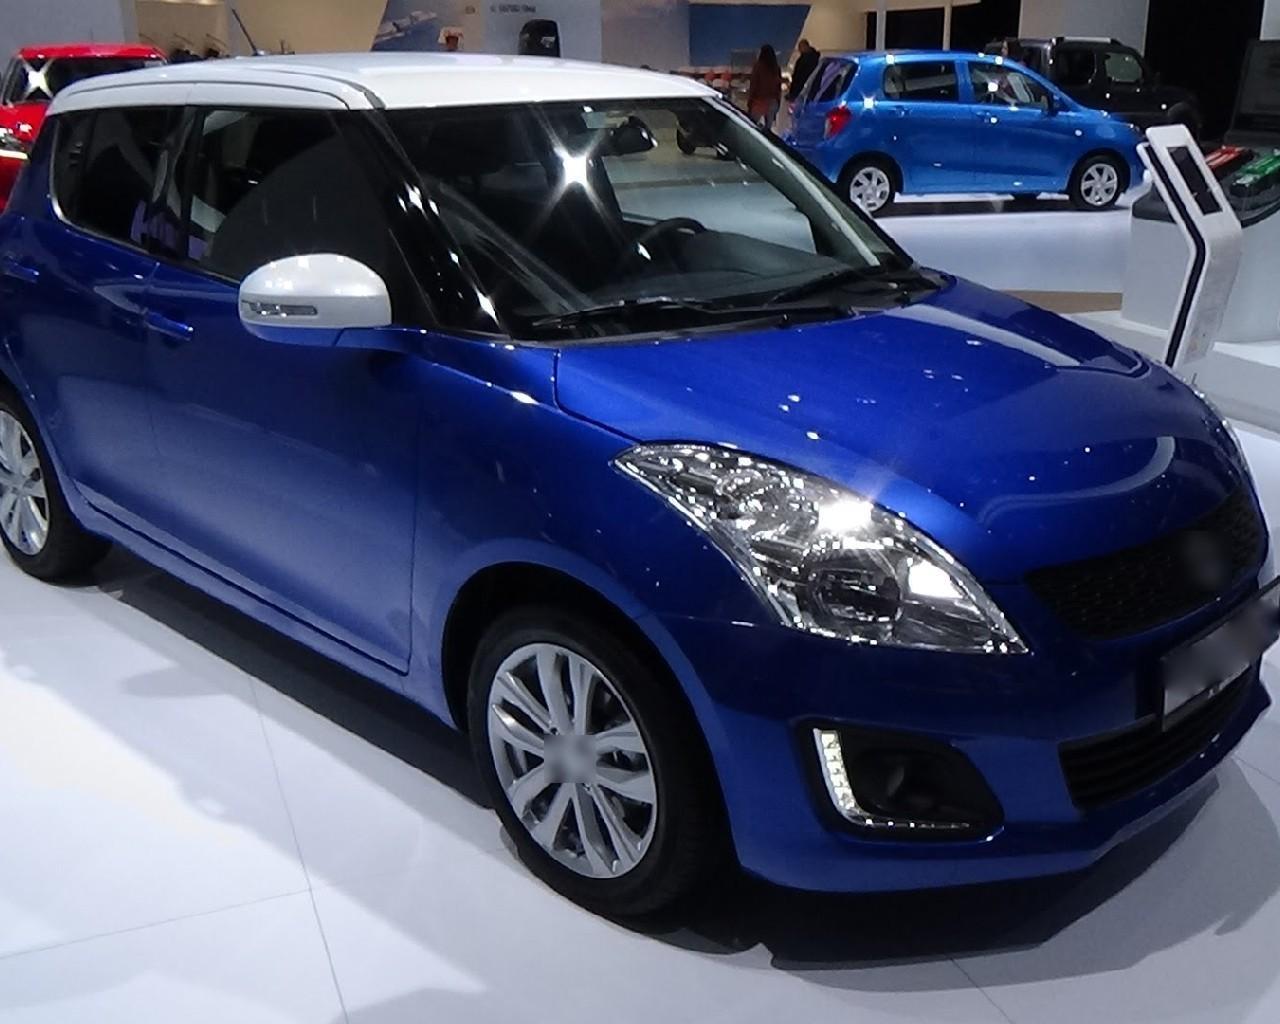 Wallpaper Of Suzuki Swift For Android Apk Download